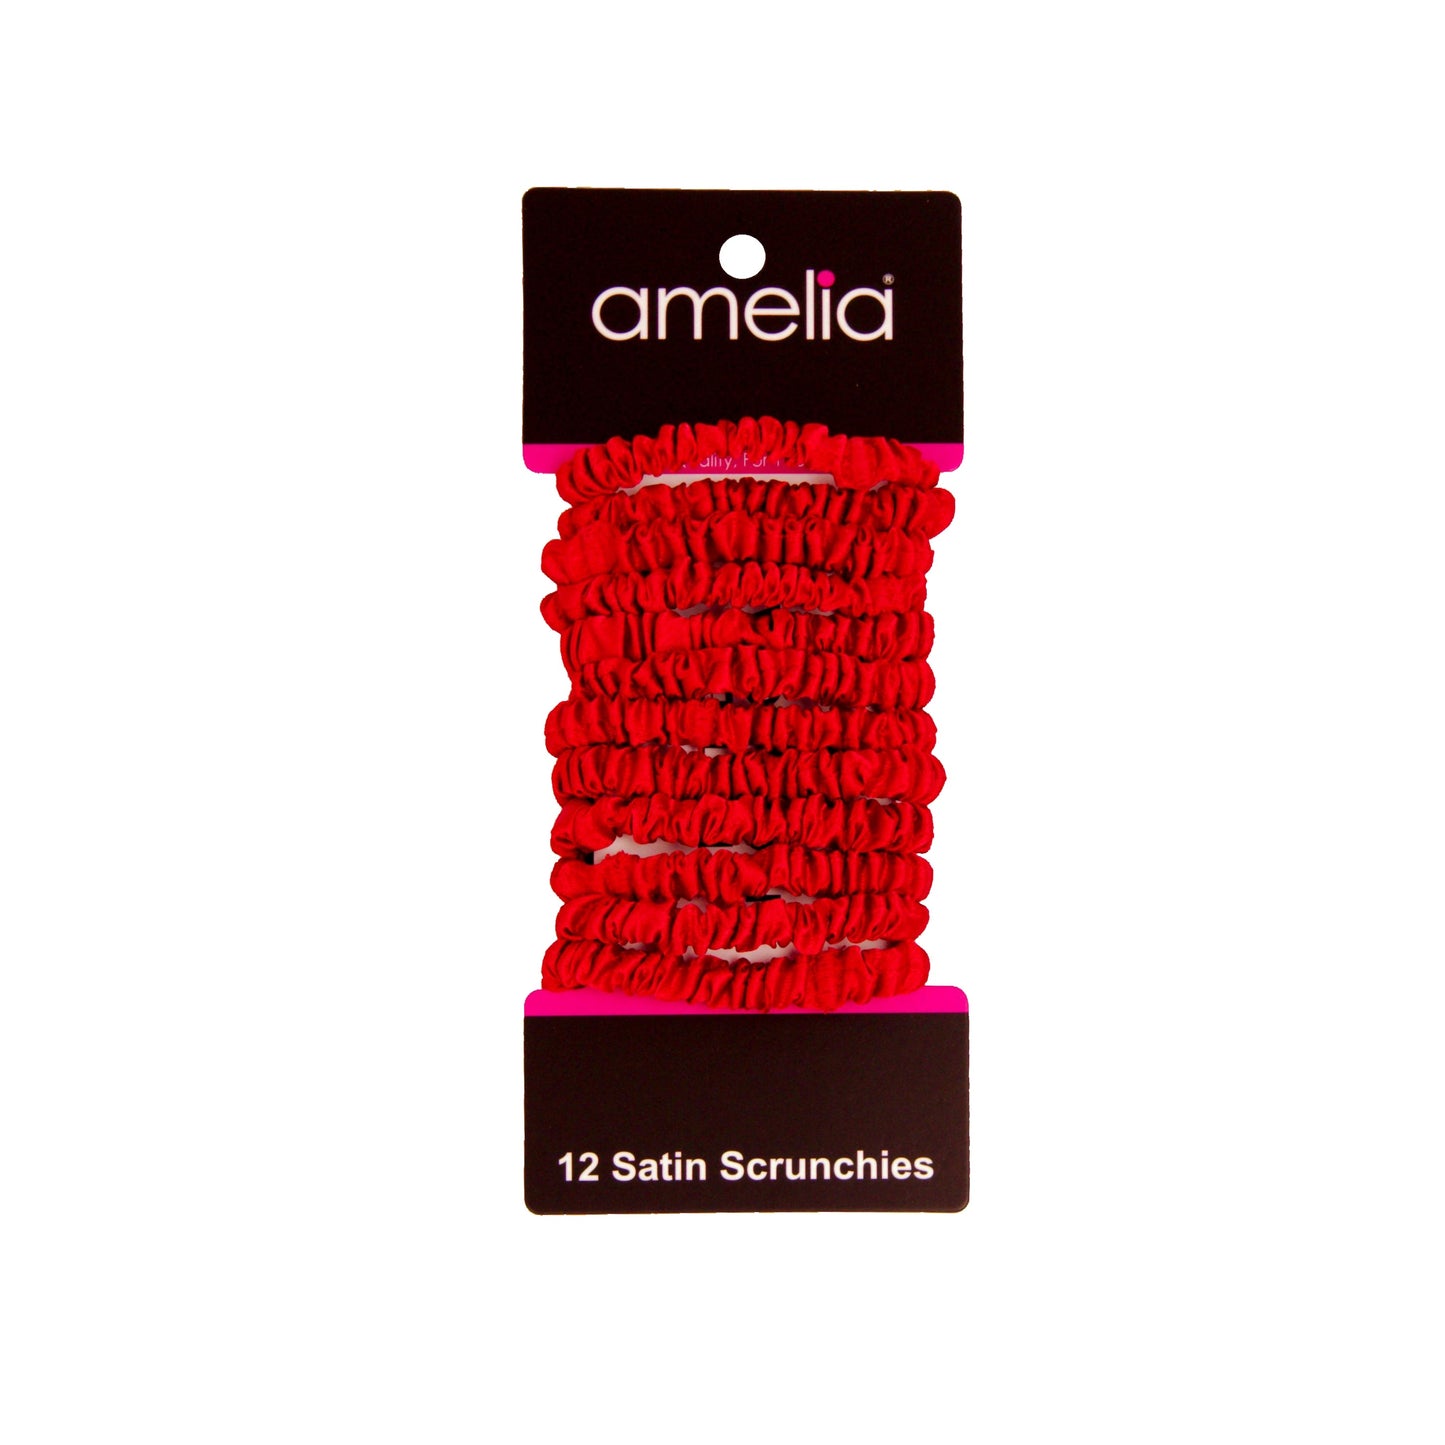 Amelia Beauty, Red Skinny Satin Scrunchies, 2in Diameter, Gentle and Strong Hold, No Snag, No Dents or Creases. 12 Pack - 12 Retail Packs